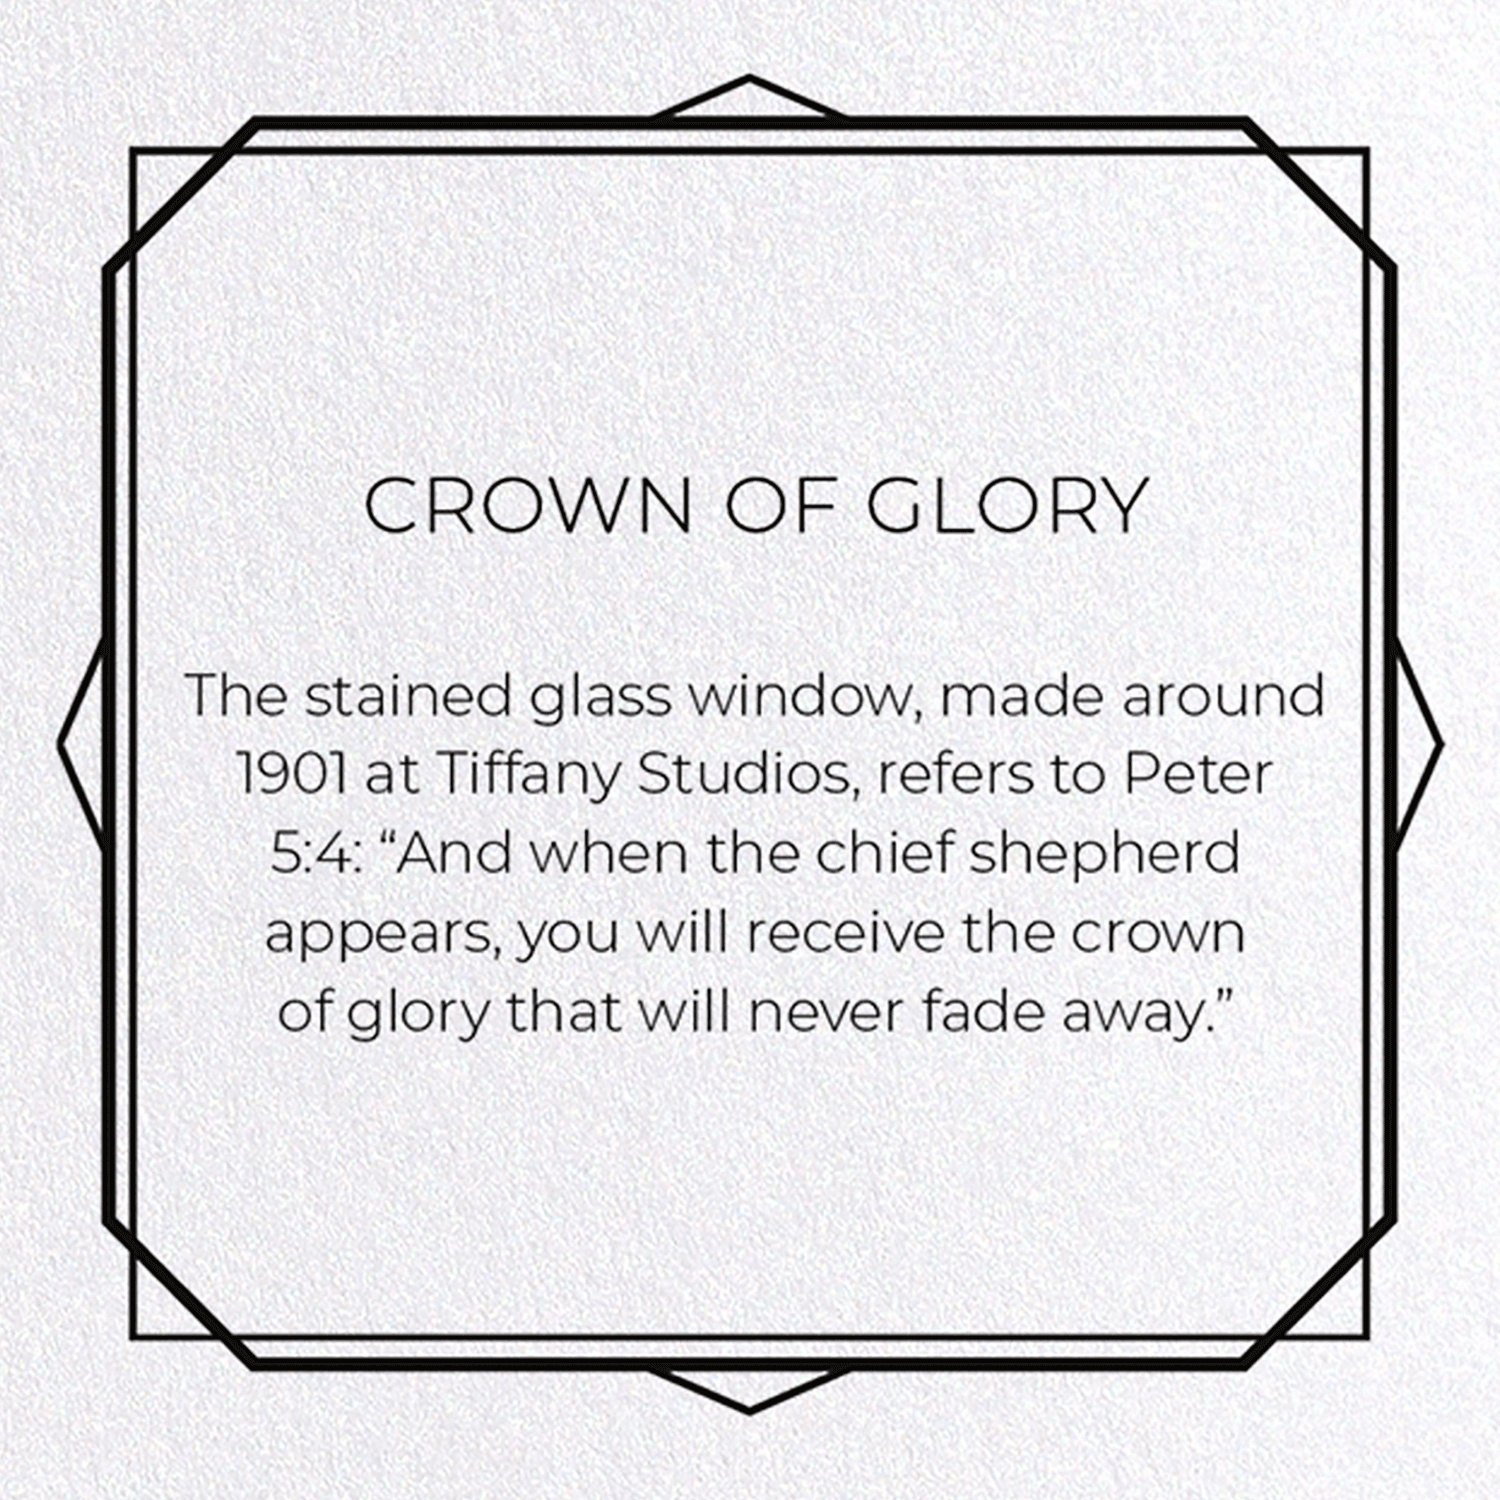 CROWN OF GLORY: Painting Greeting Card